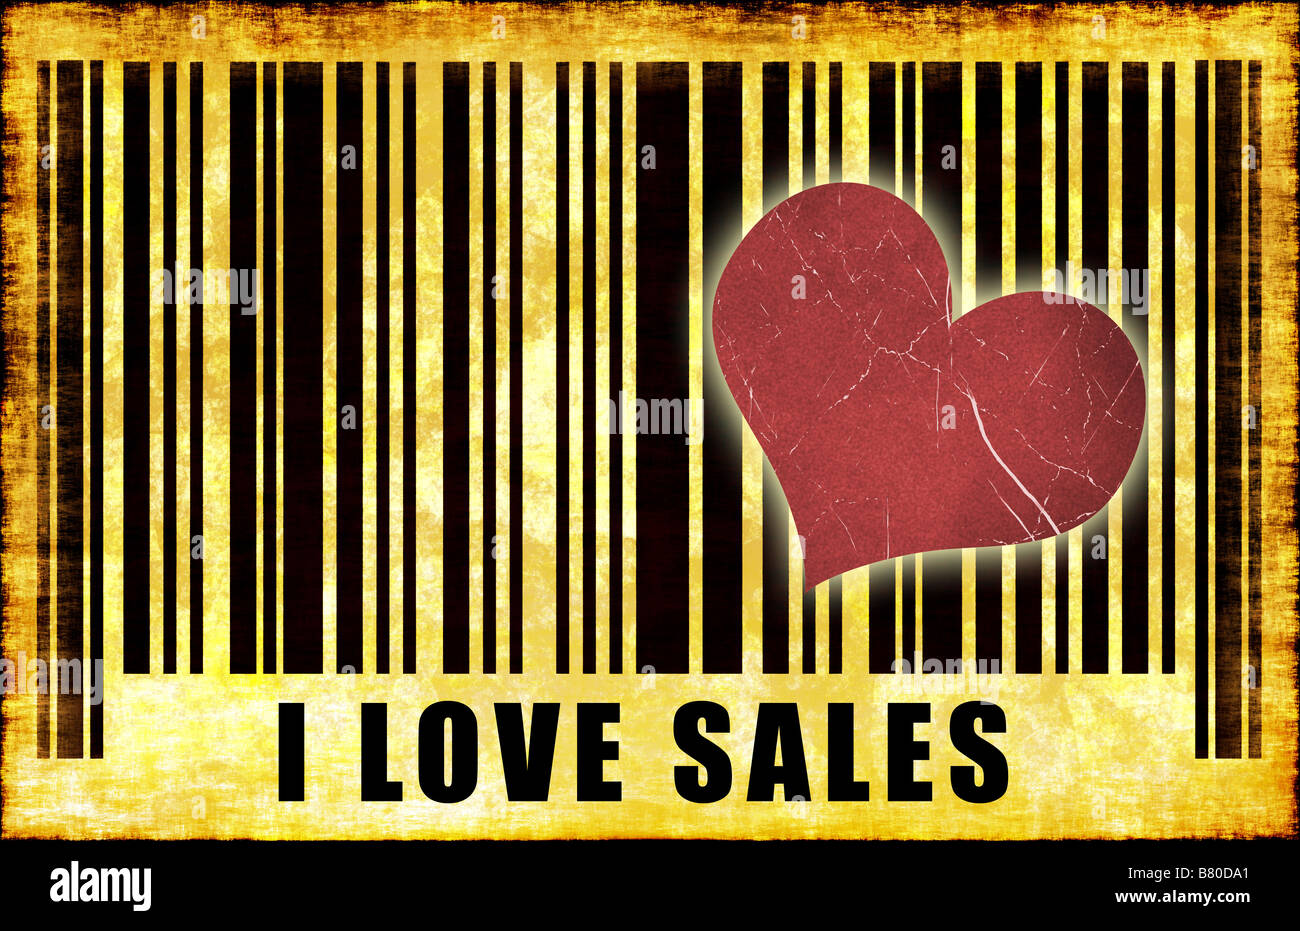 I Love Sales Cheap Shopper Grunge Abstract Stock Photo